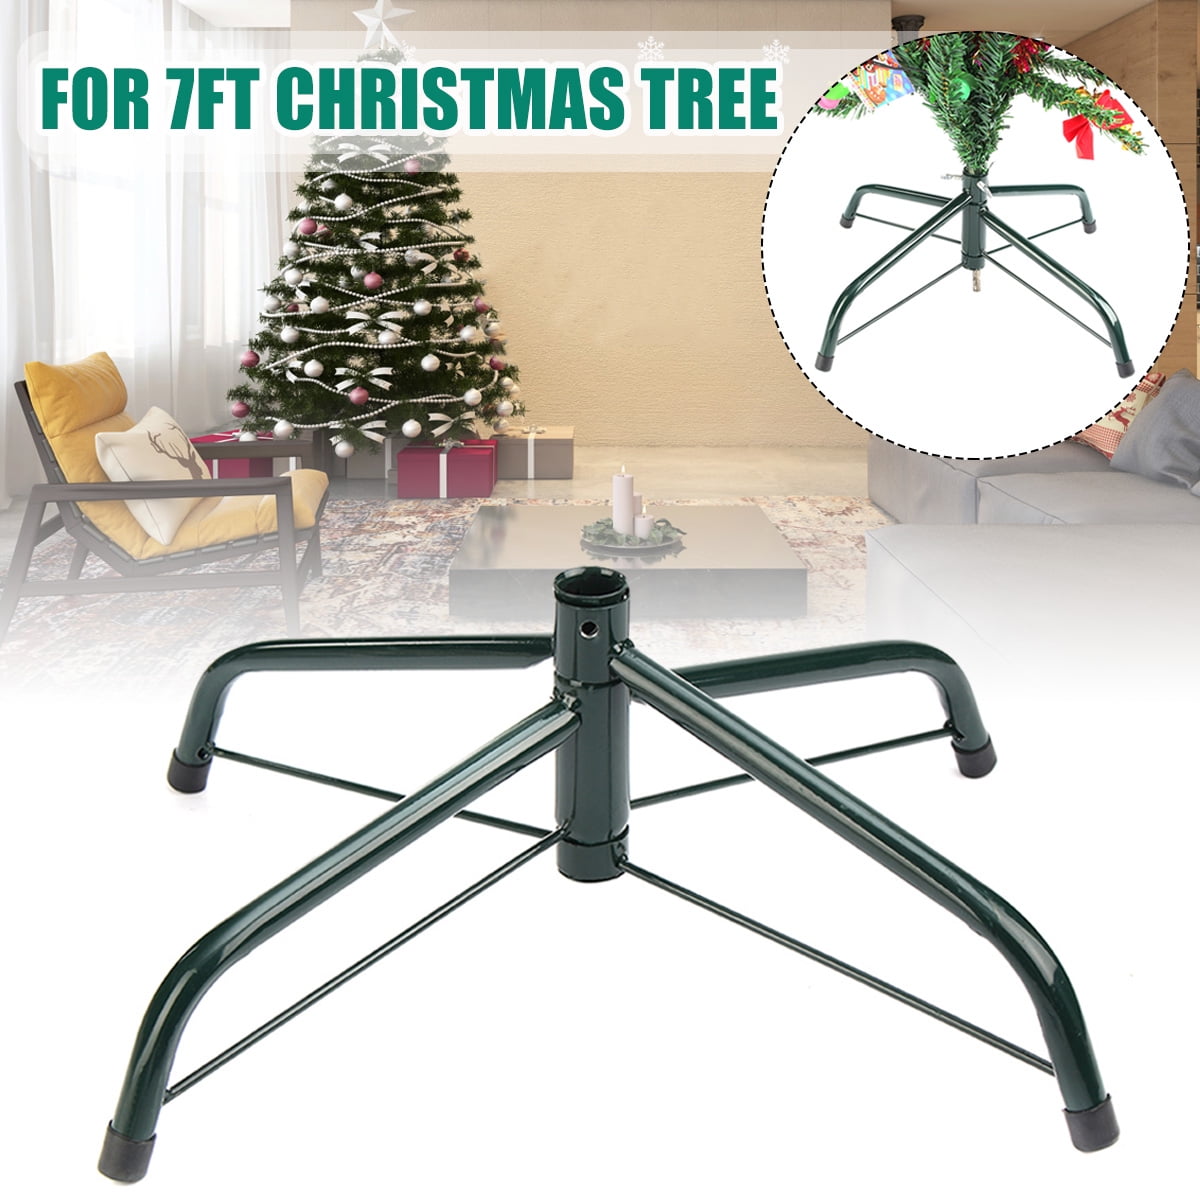 Green Metal Christmas Tree Stand For 7ft Artificial Nepal | Ubuy